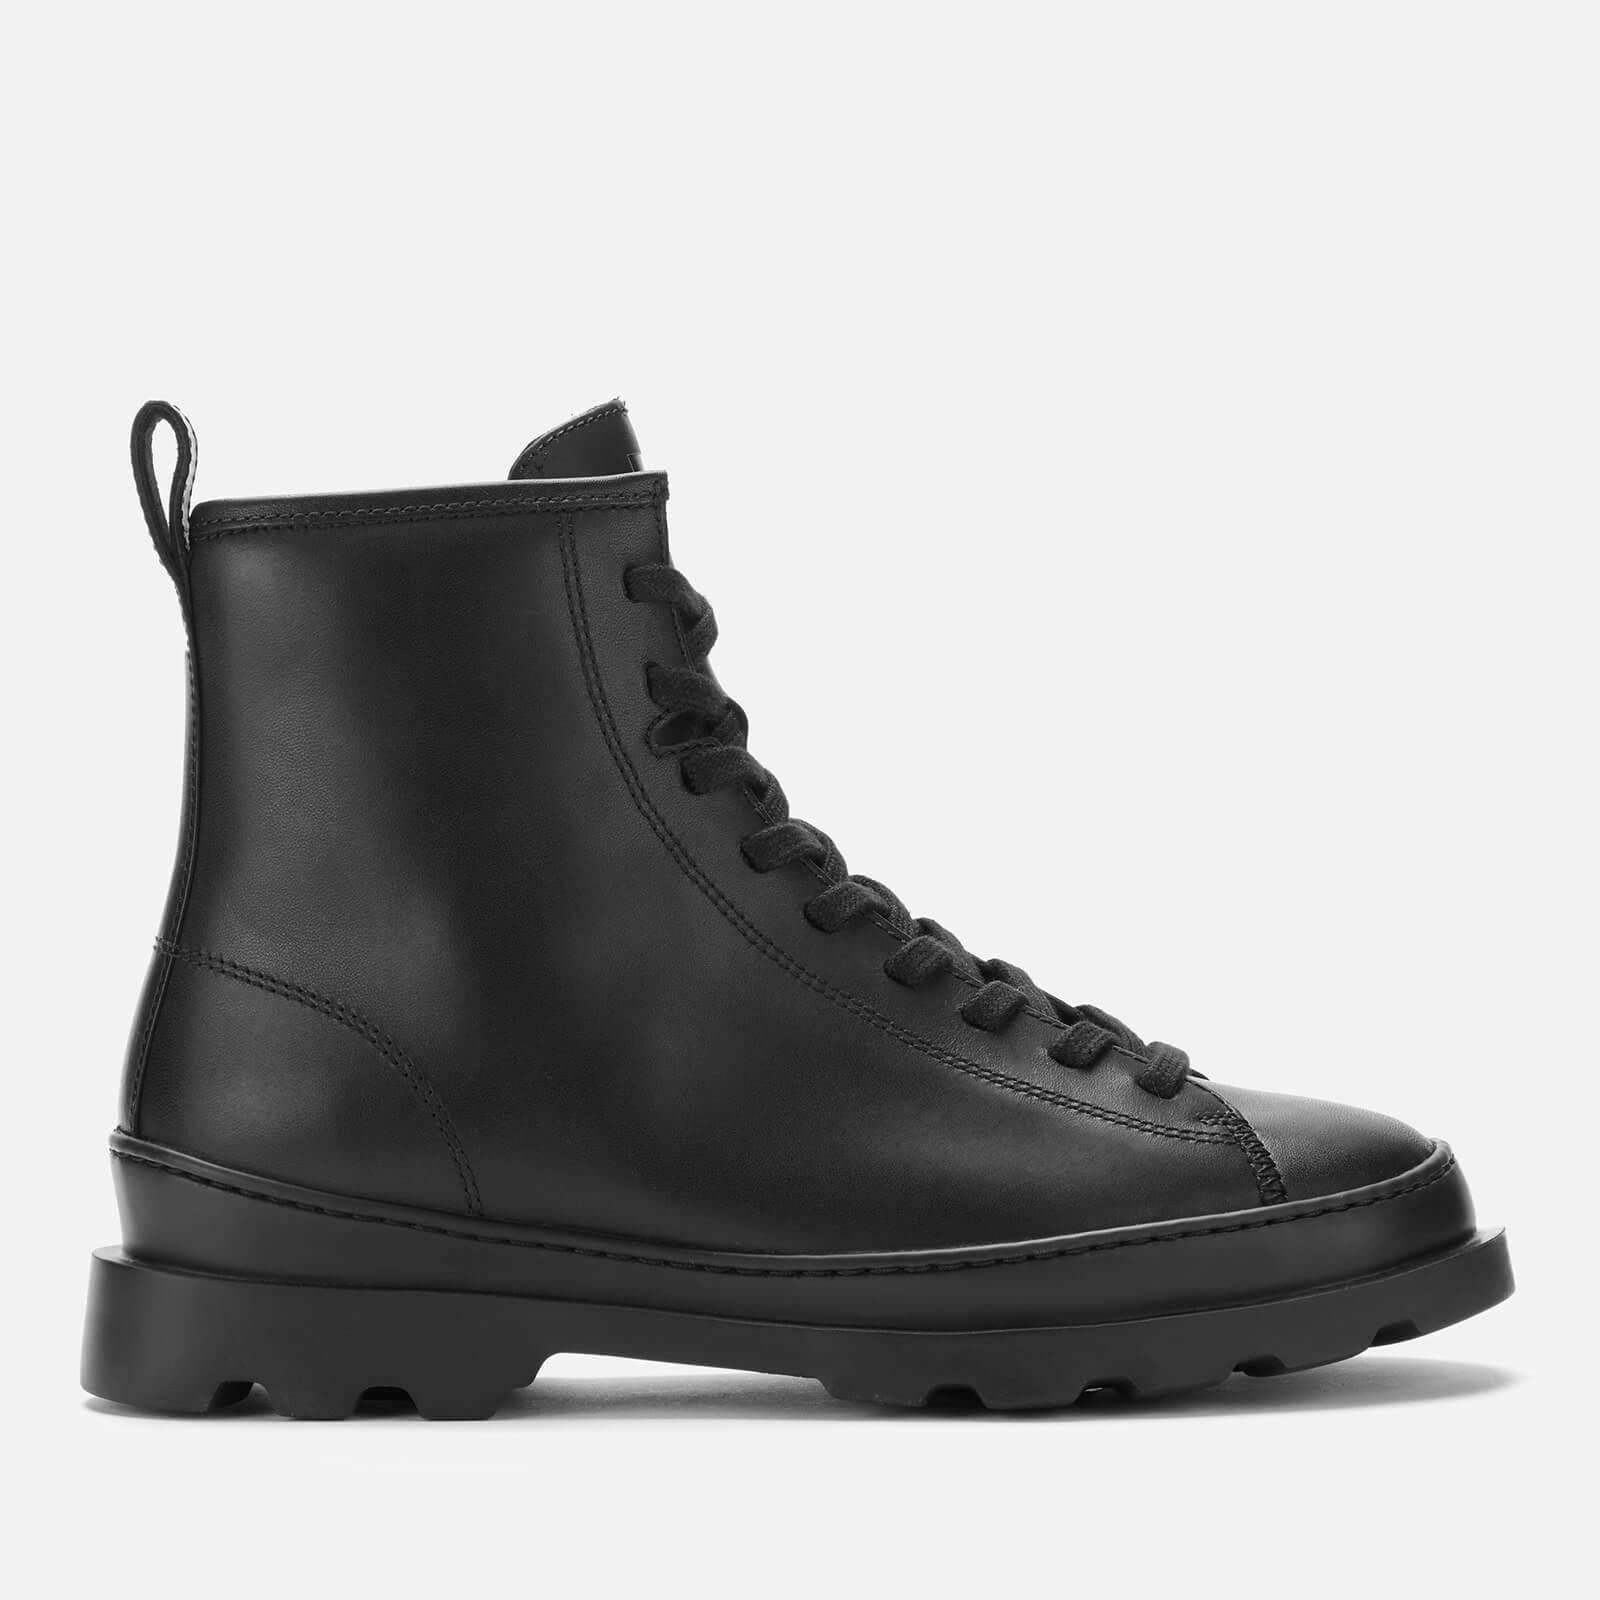 Camper Brutus Leather Lace Up Boots in Black - Lyst